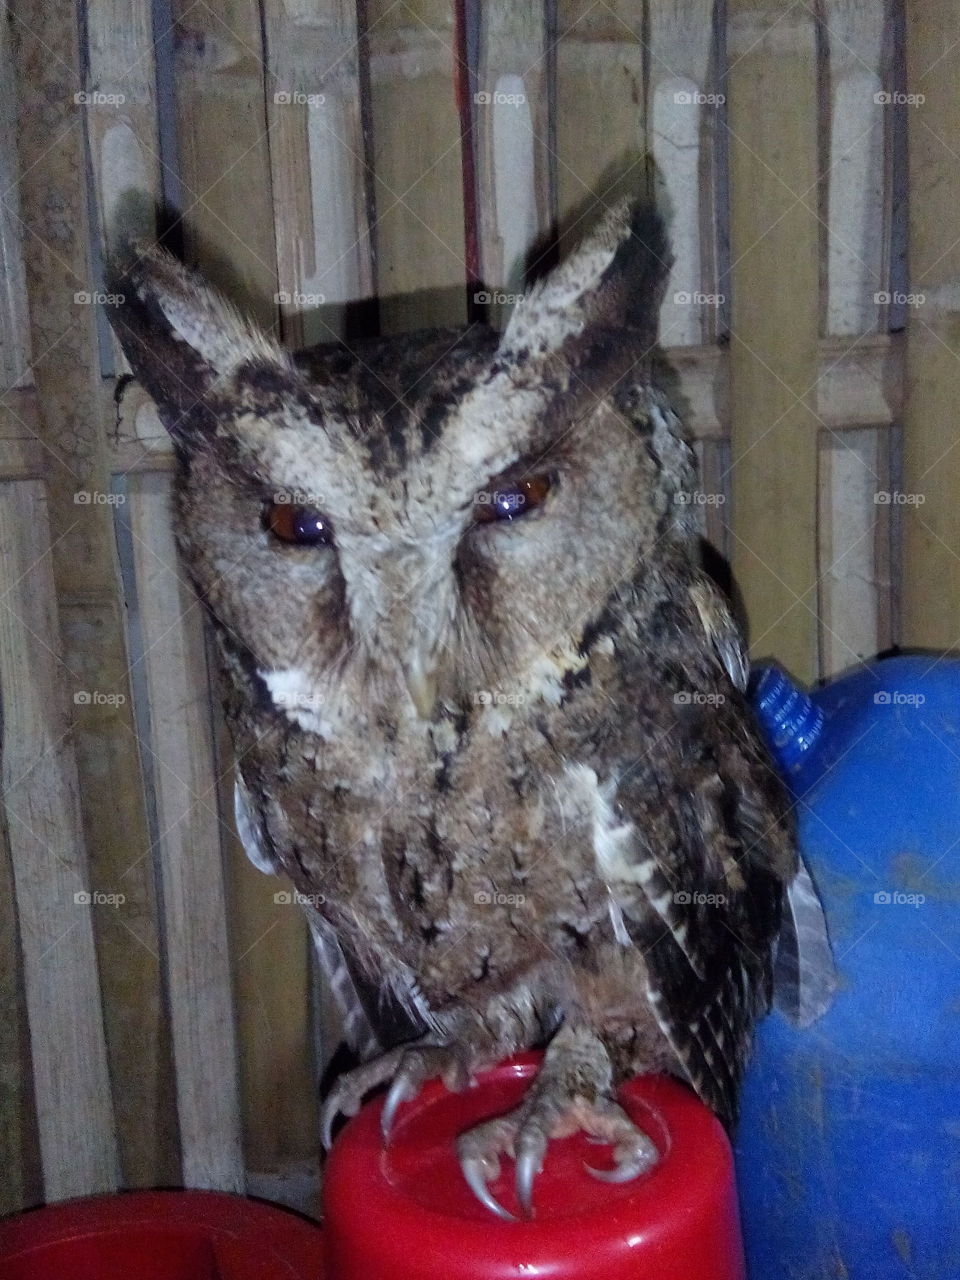 the owl visit our home one night